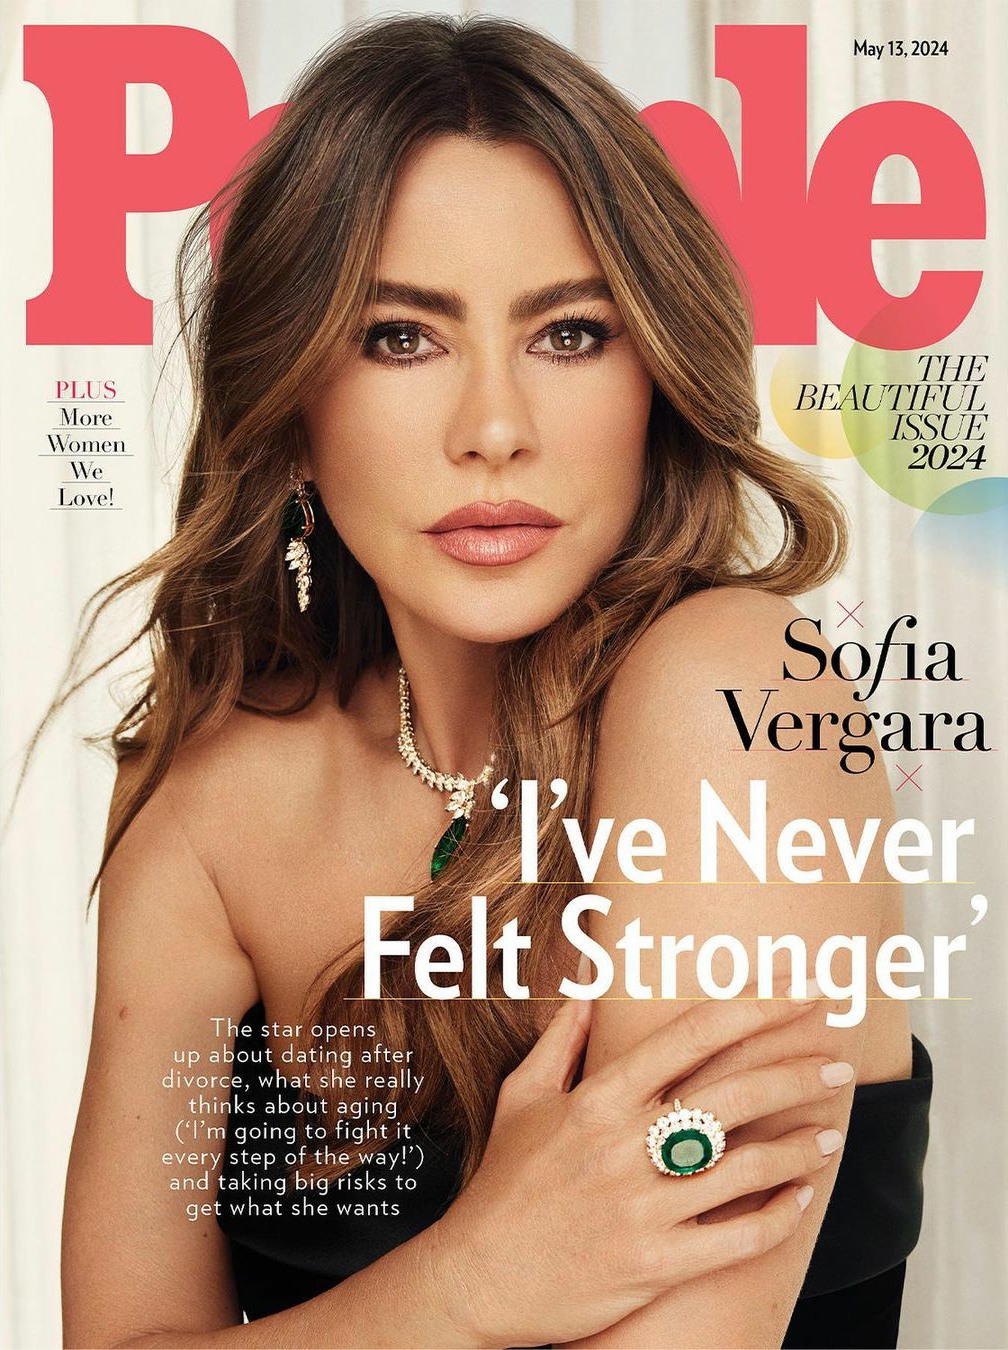 Sofia Vergara: Nature says you’re supposed to be menopausal at 50, not having babies